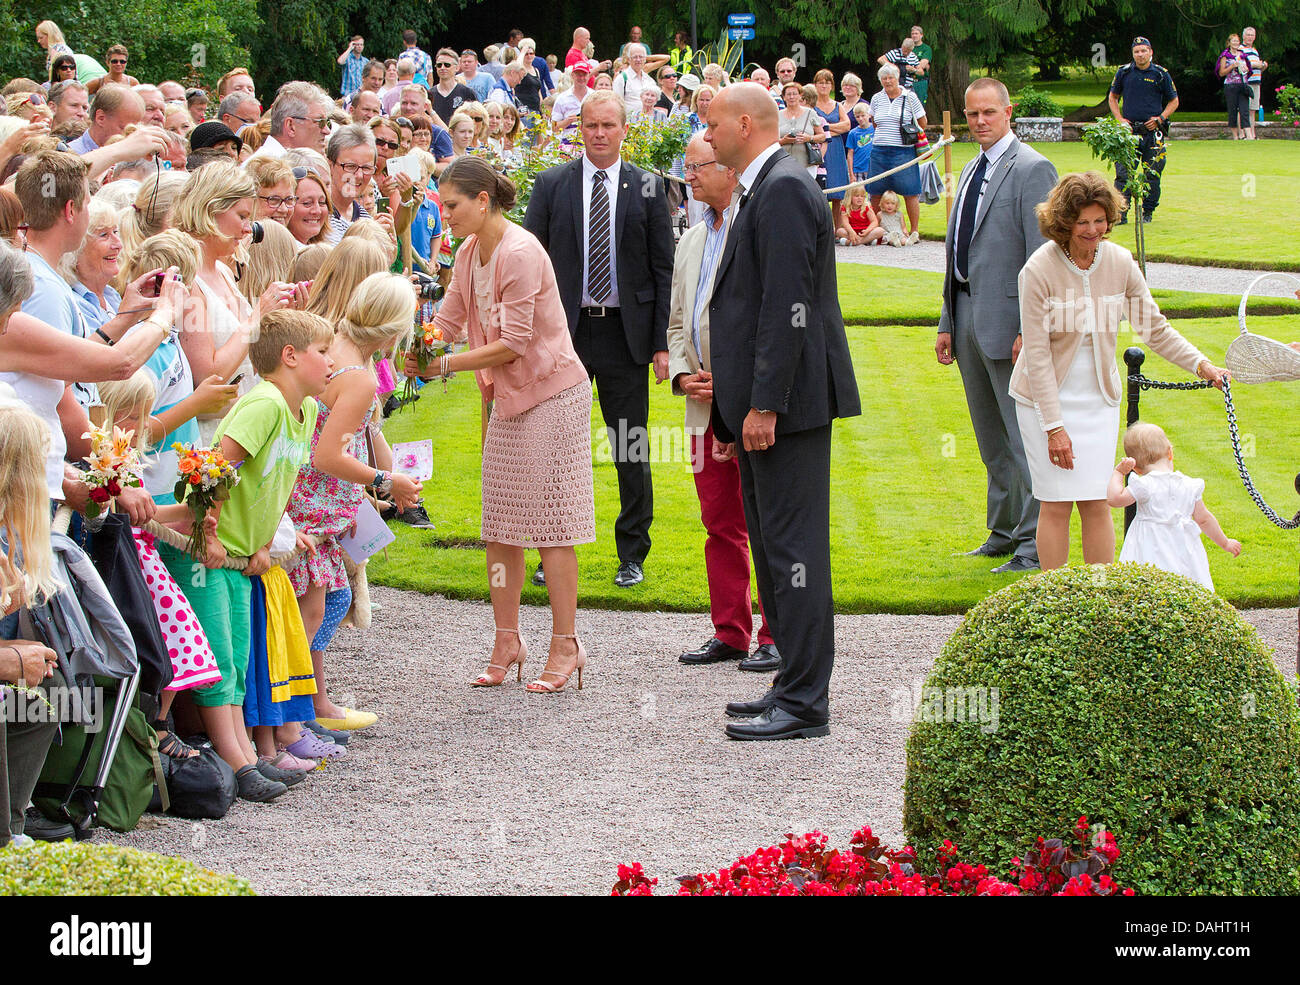 Island Oland, Sweden. 14th July, 2013. L-R: Crown Princess Victoria of Sweden, King Carl Gustav of Sweden, Queen Silvia of Sweden, and Princess Estelle of Sweden meet wellwishers to celebrate the 36th birthday of crown princess Victoria at Solliden Castle on Oeland, Sweden Sunday 14 July 2013, Photo: Albert Nieboer/ / /dpa/Alamy Live News Stock Photo